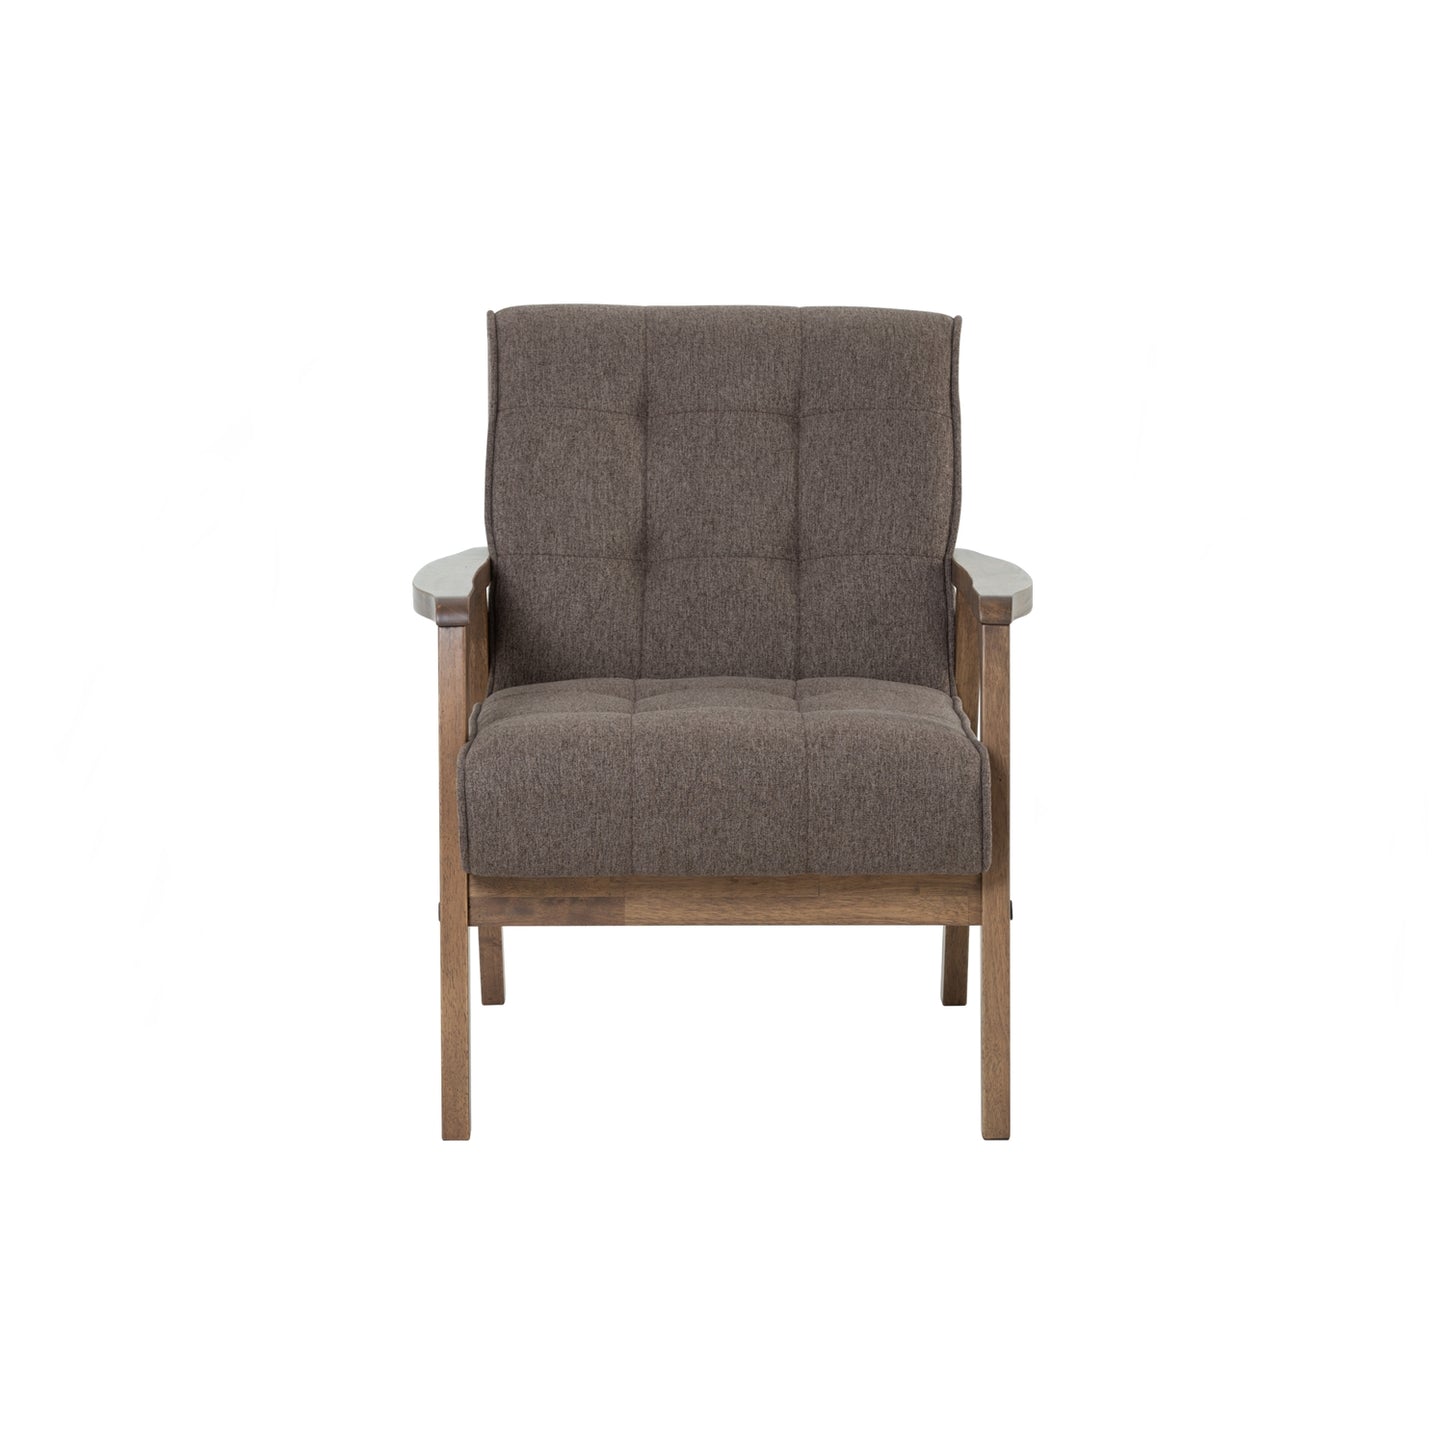 Denver 1 Seater Sofa in Taupe Fabric